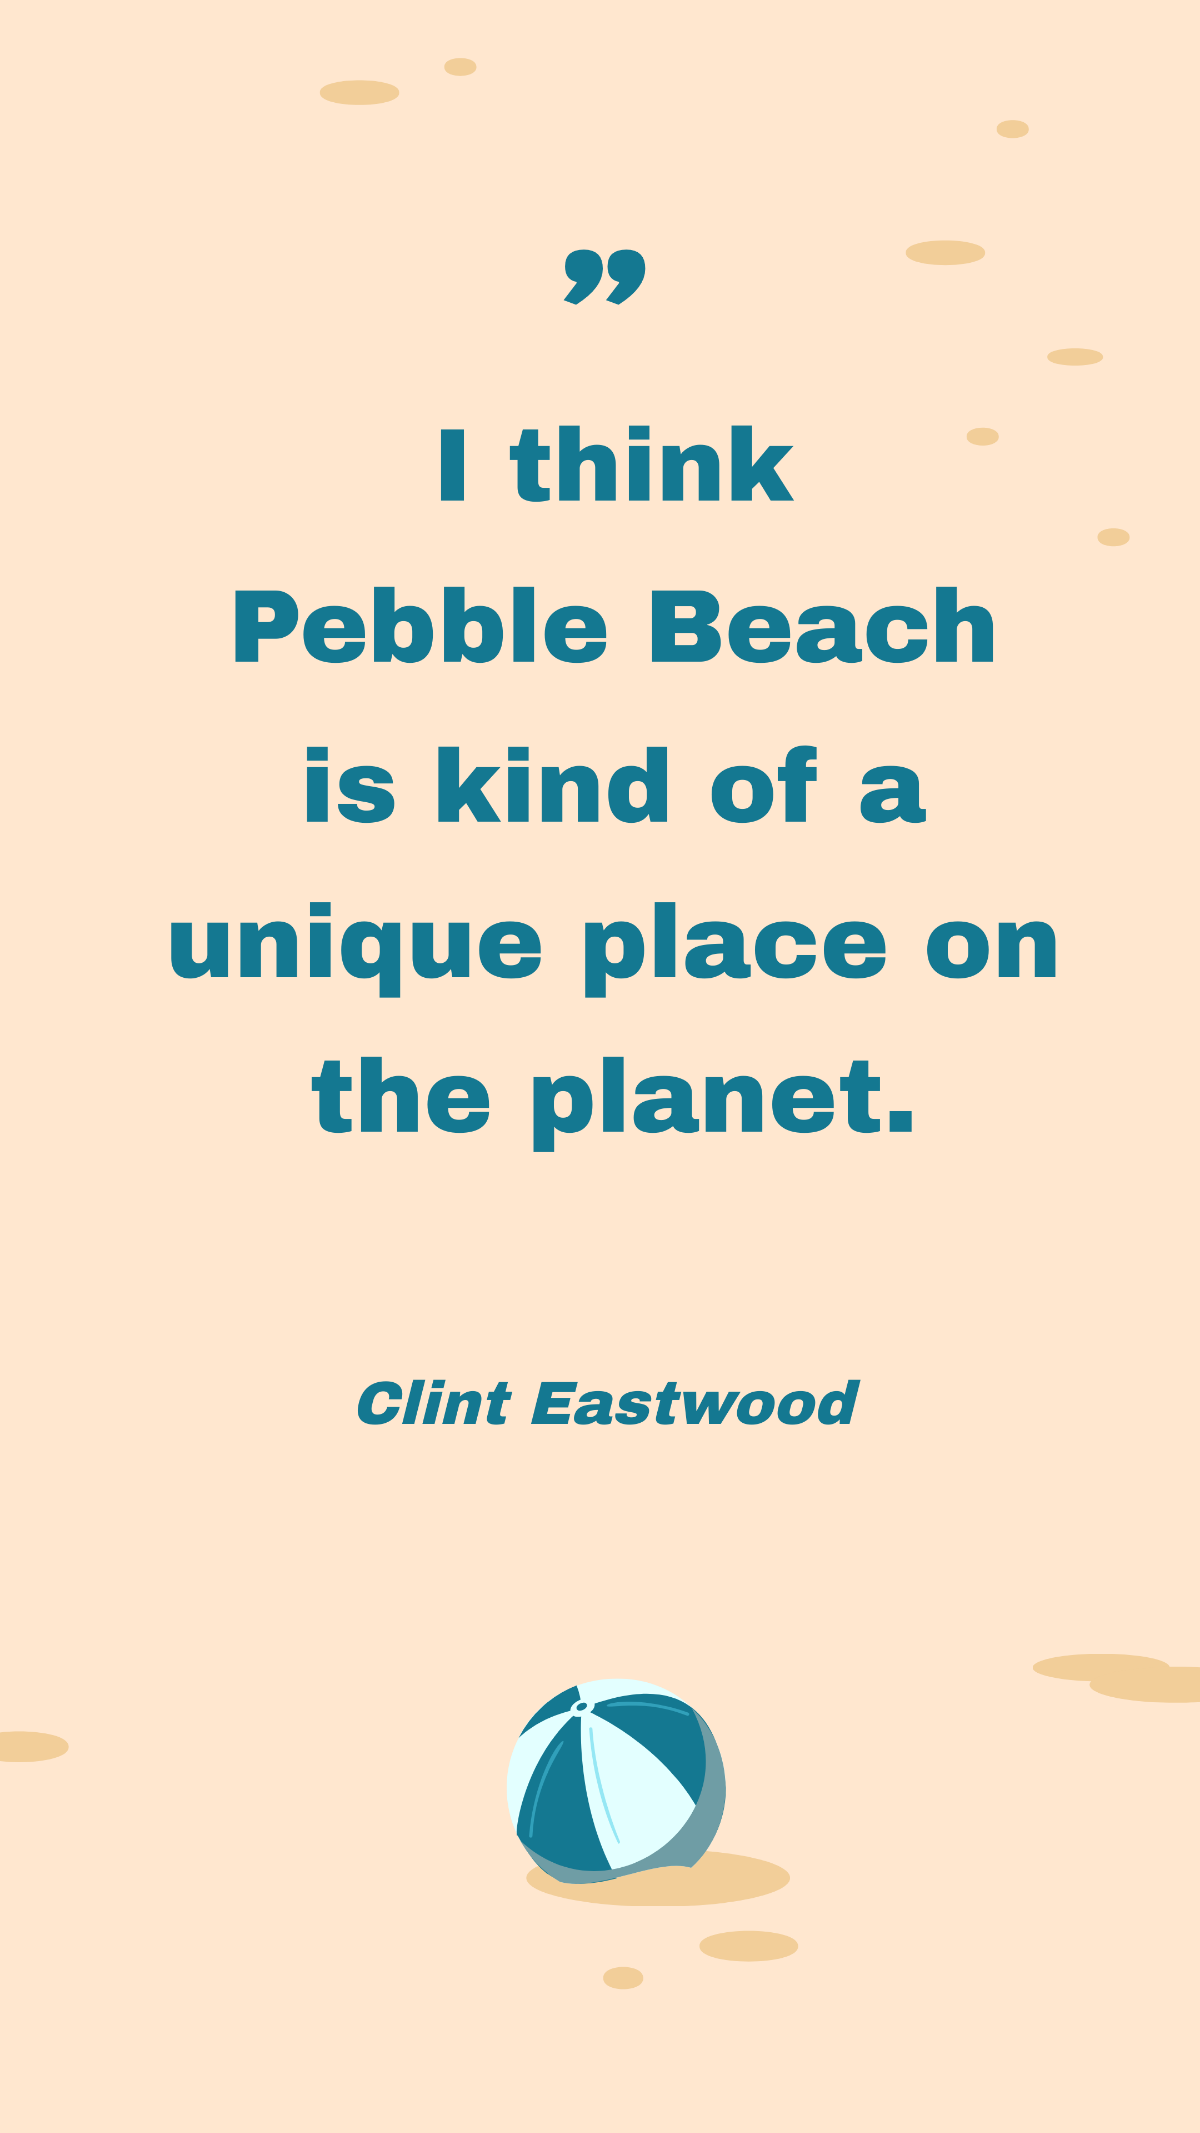 Clint Eastwood - I think Pebble Beach is kind of a unique place on the planet. Template